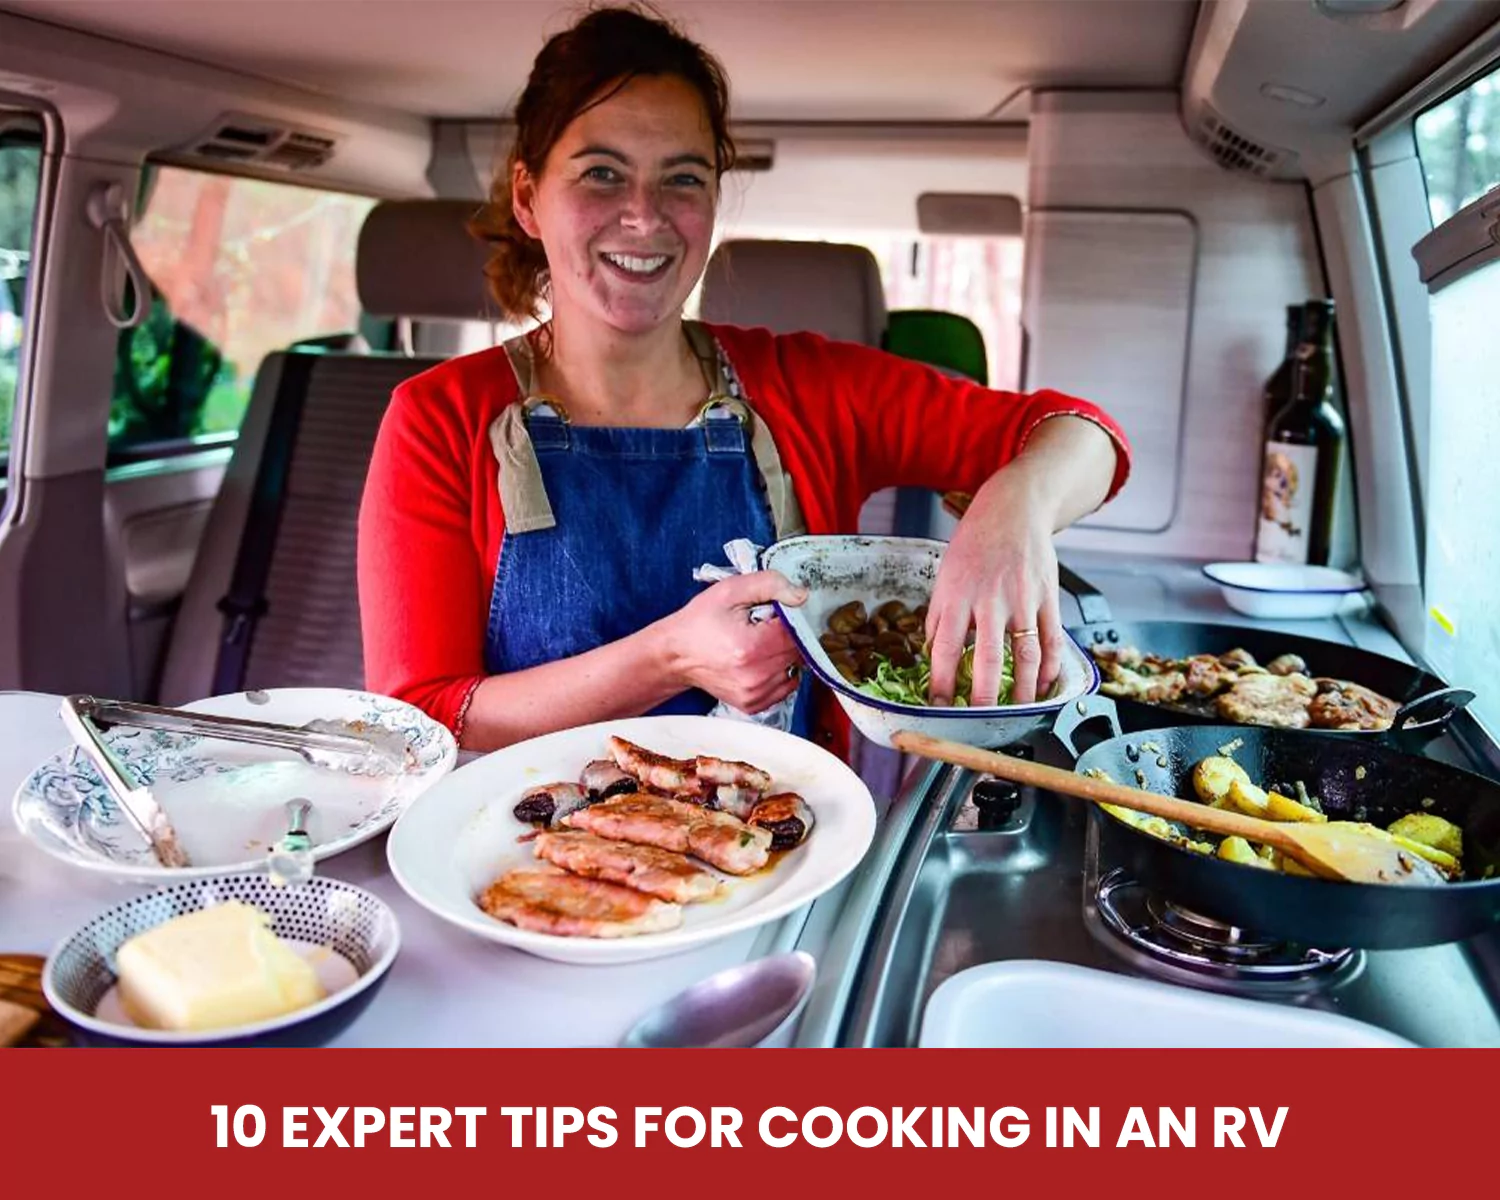 10 Expert Tips For Cooking In An RV